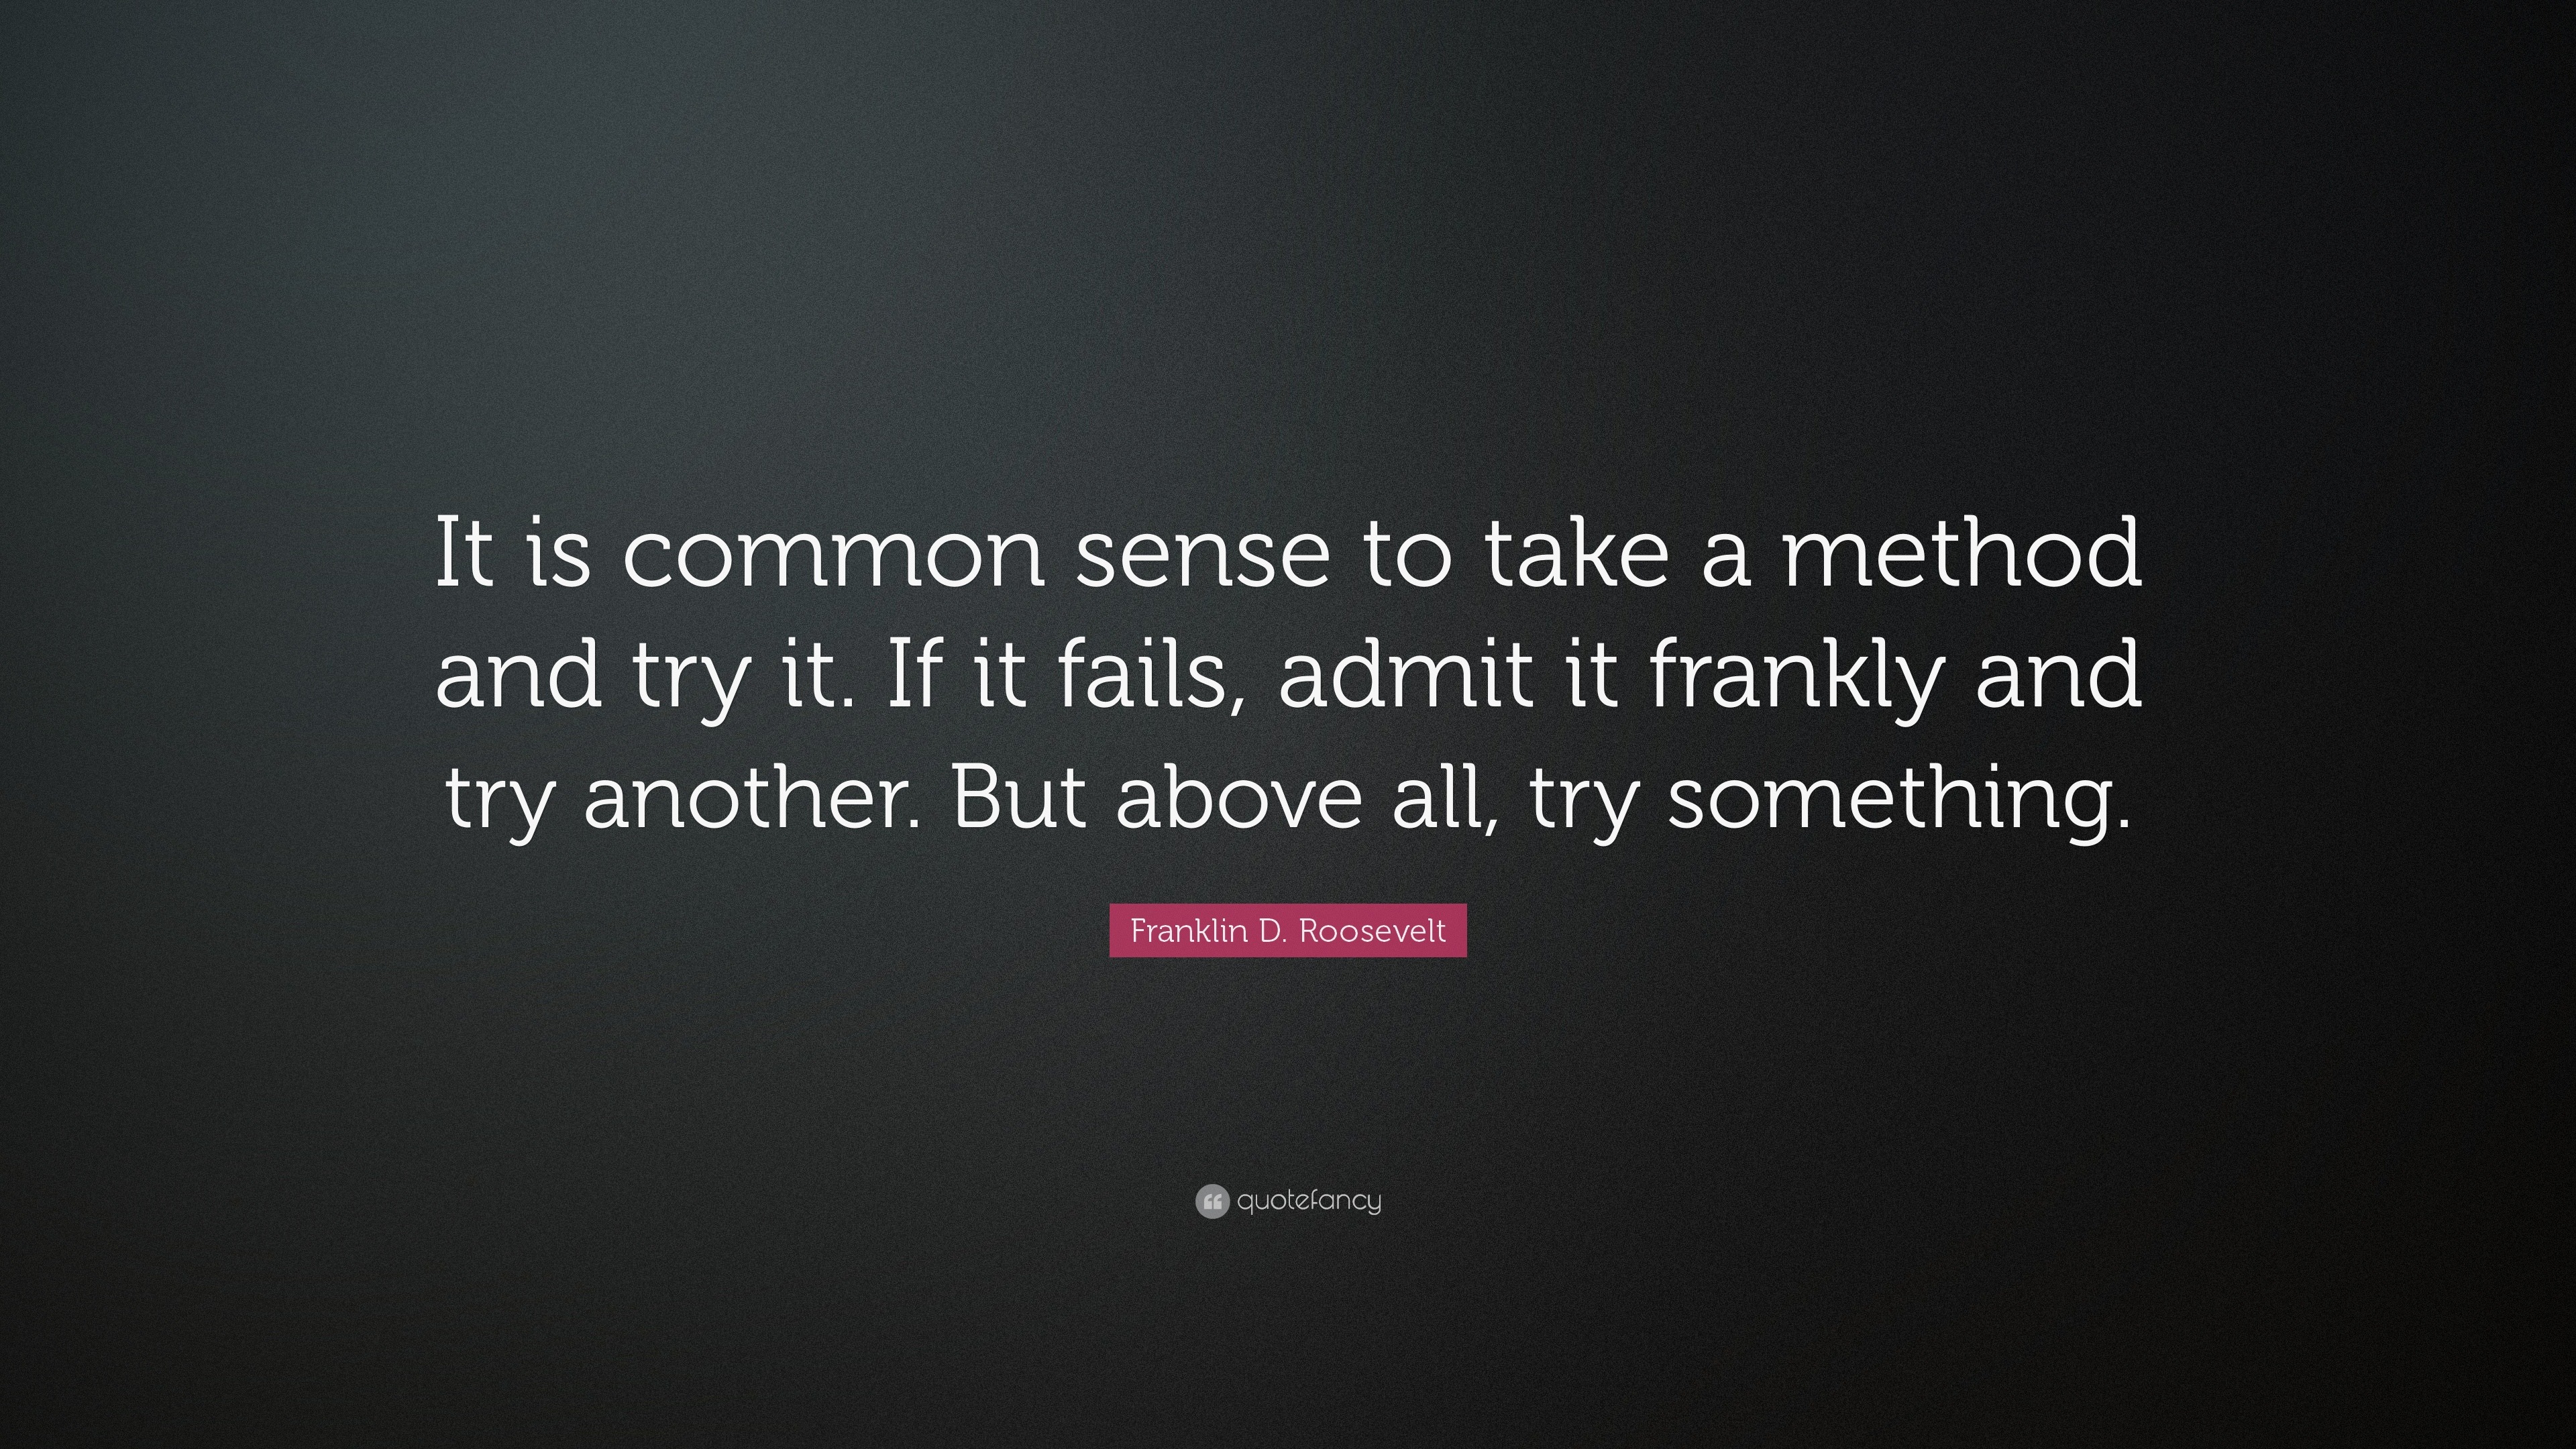 Franklin D Roosevelt Quote: It is common sense to take a method and